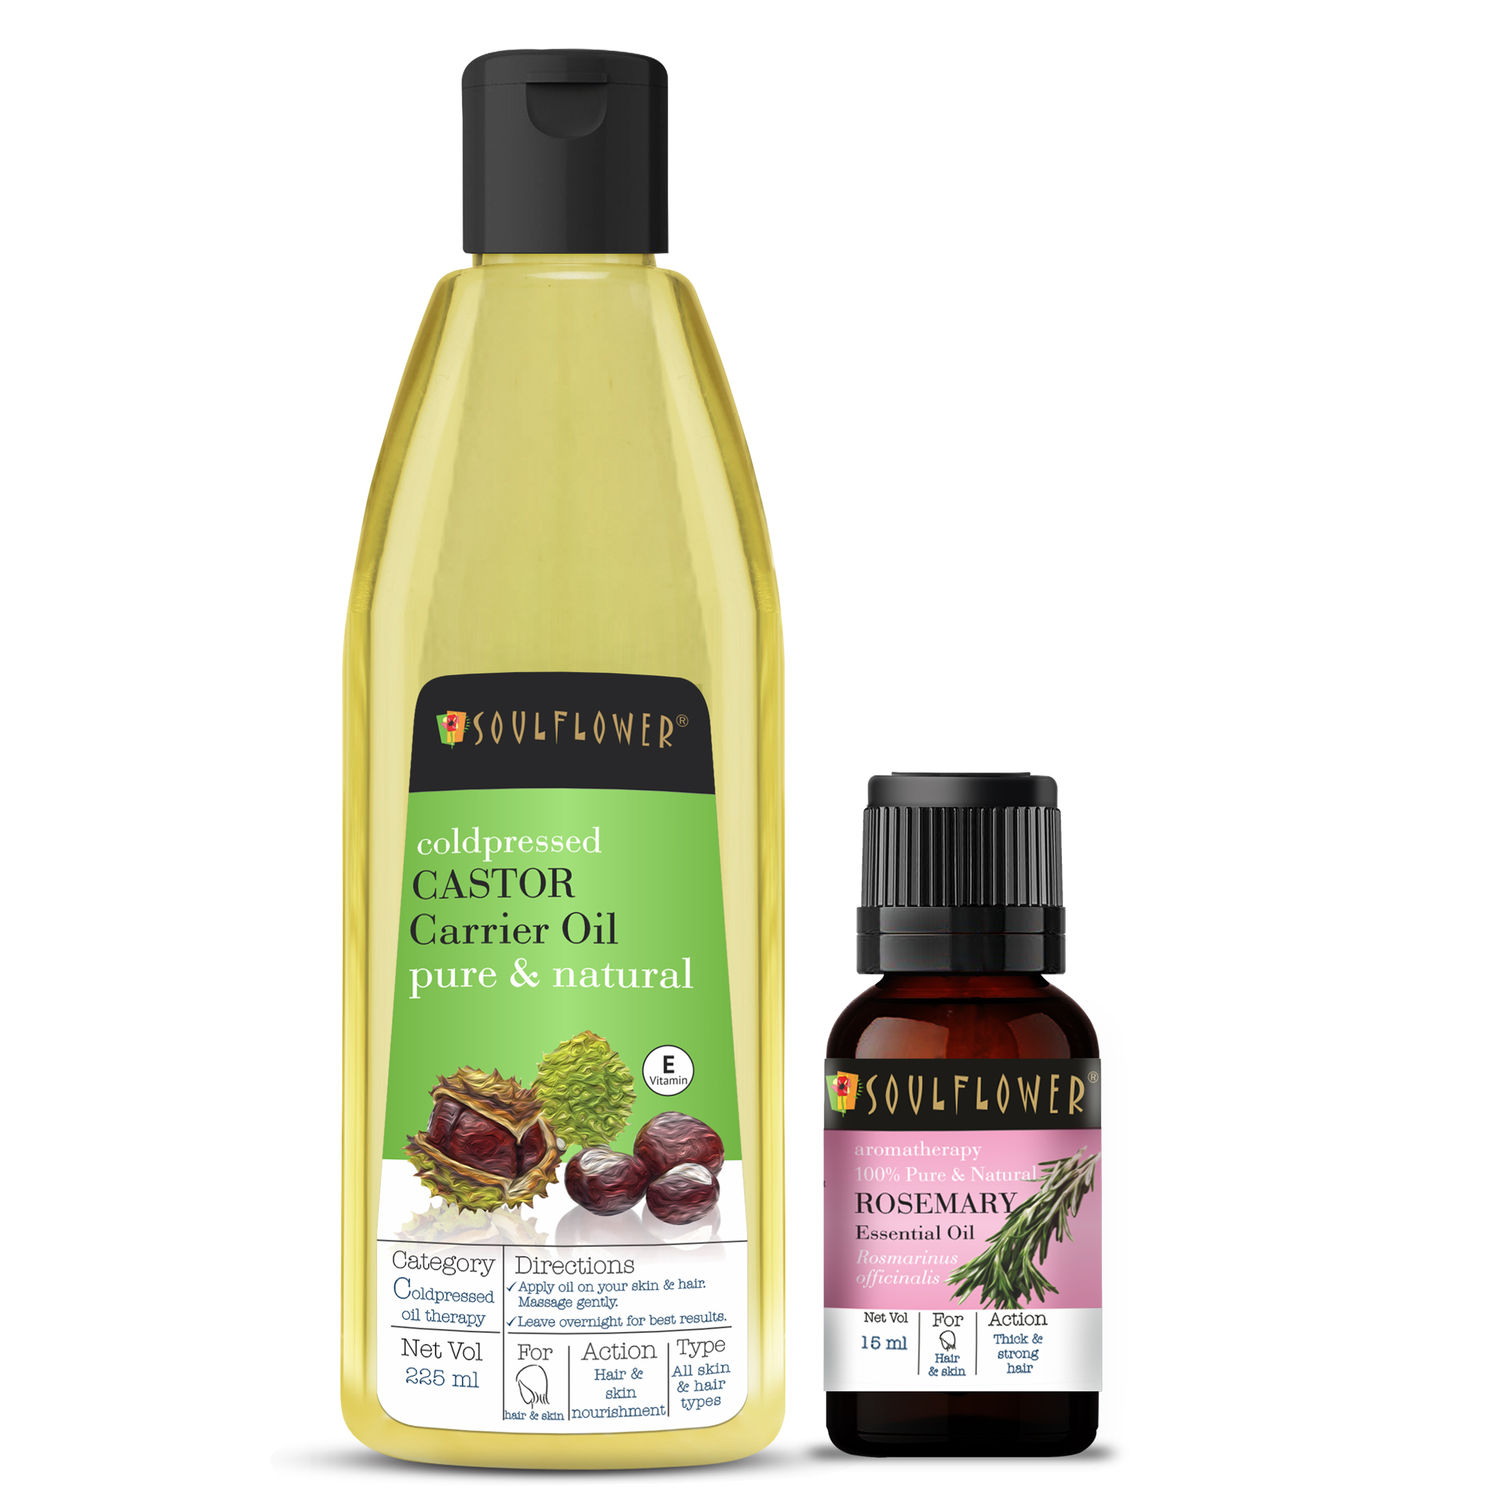 Buy Soulflower Coldpressed Castor Hair Oil (225ml) and Rosemary Essential Oil (15ml) Pack of 2 - Purplle